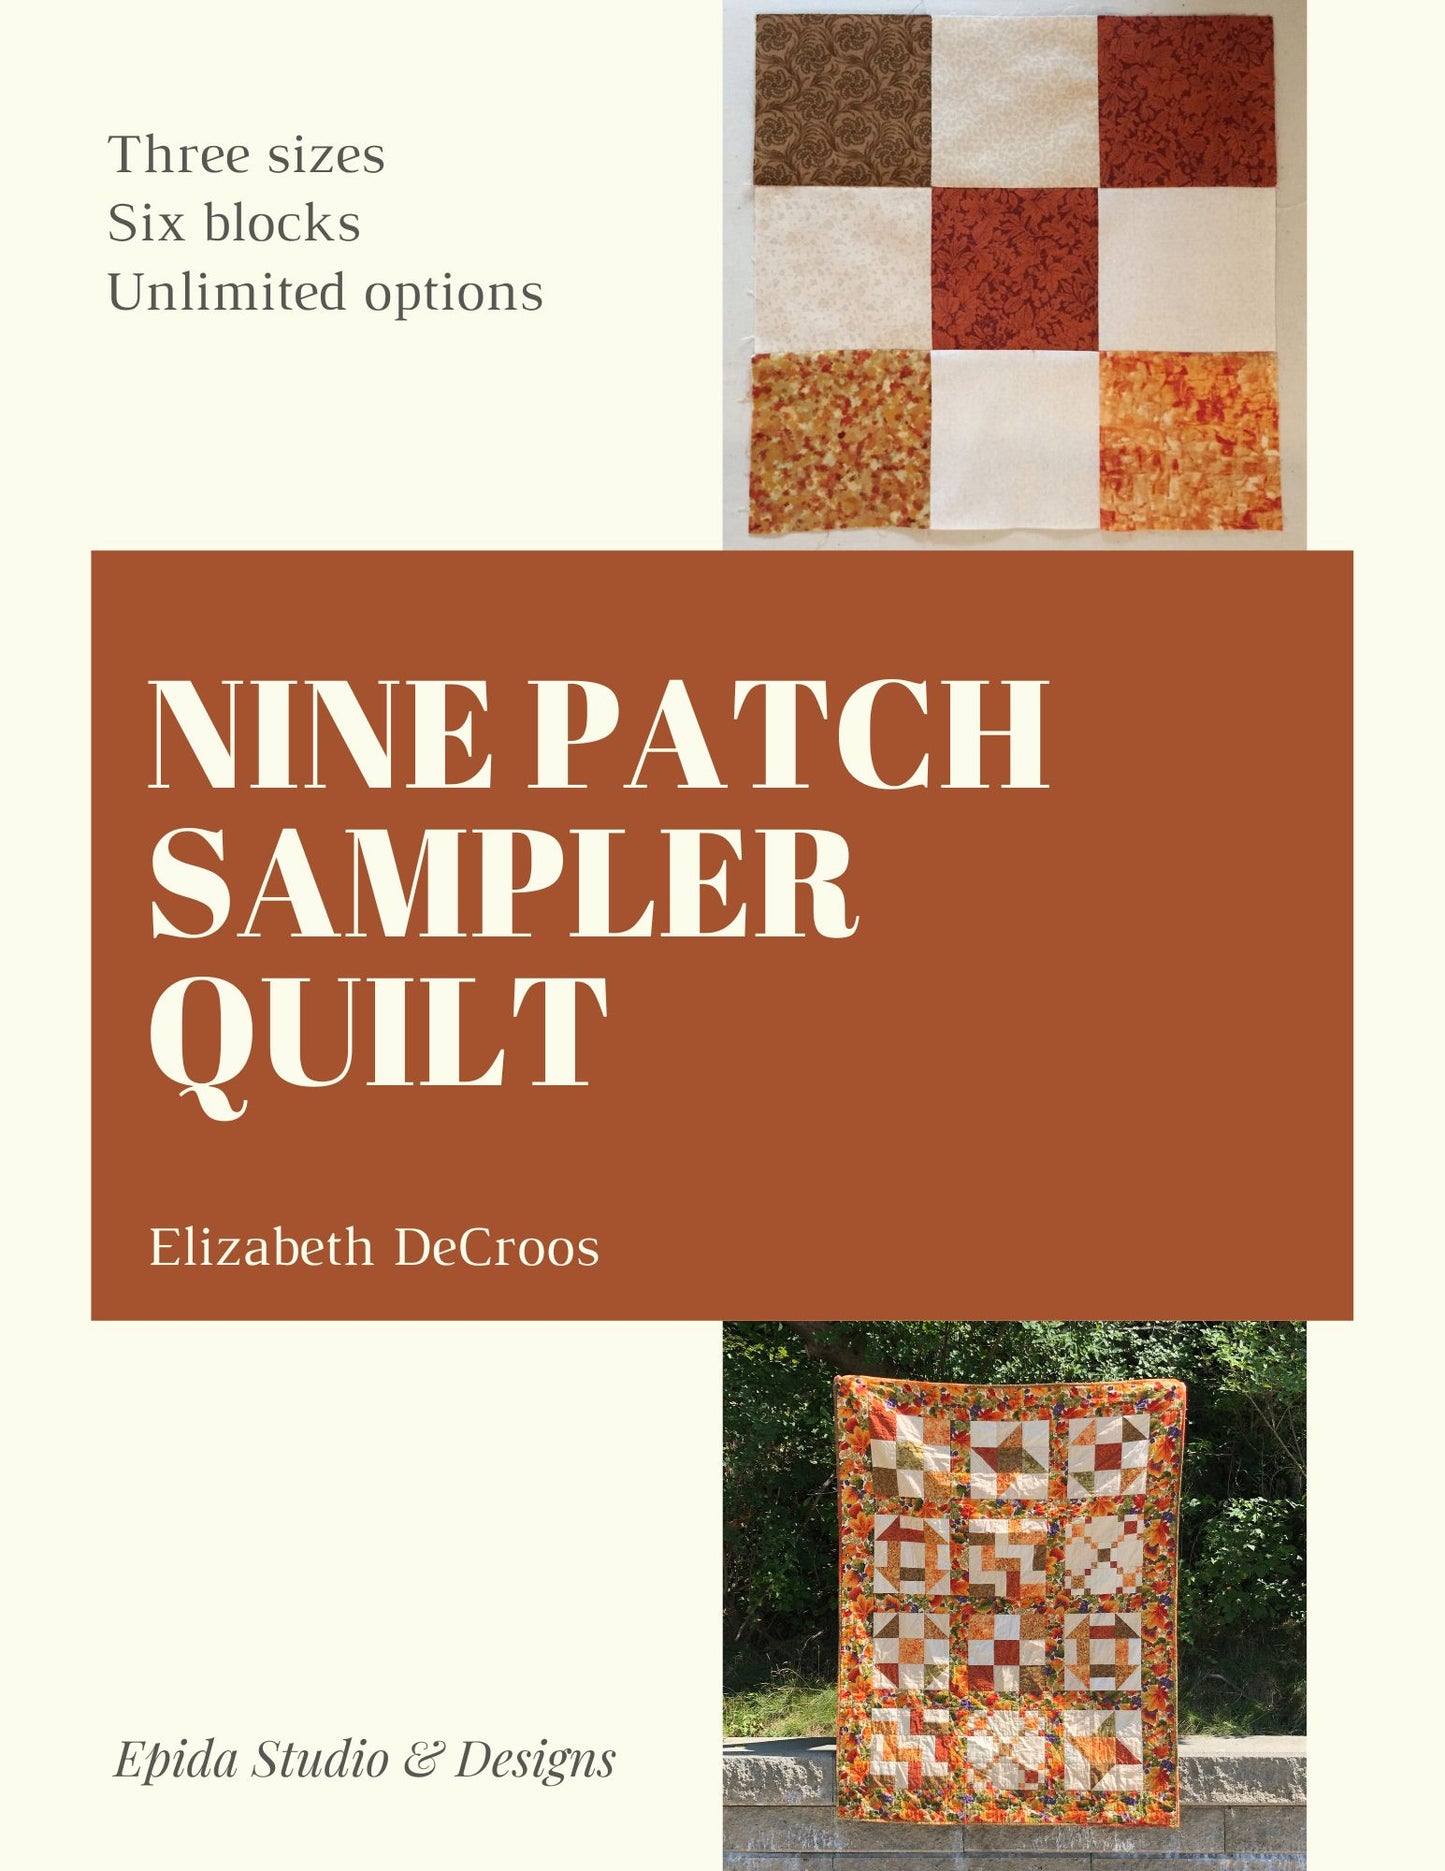 Cover of the book "Nine Patch Sampler Quilt".